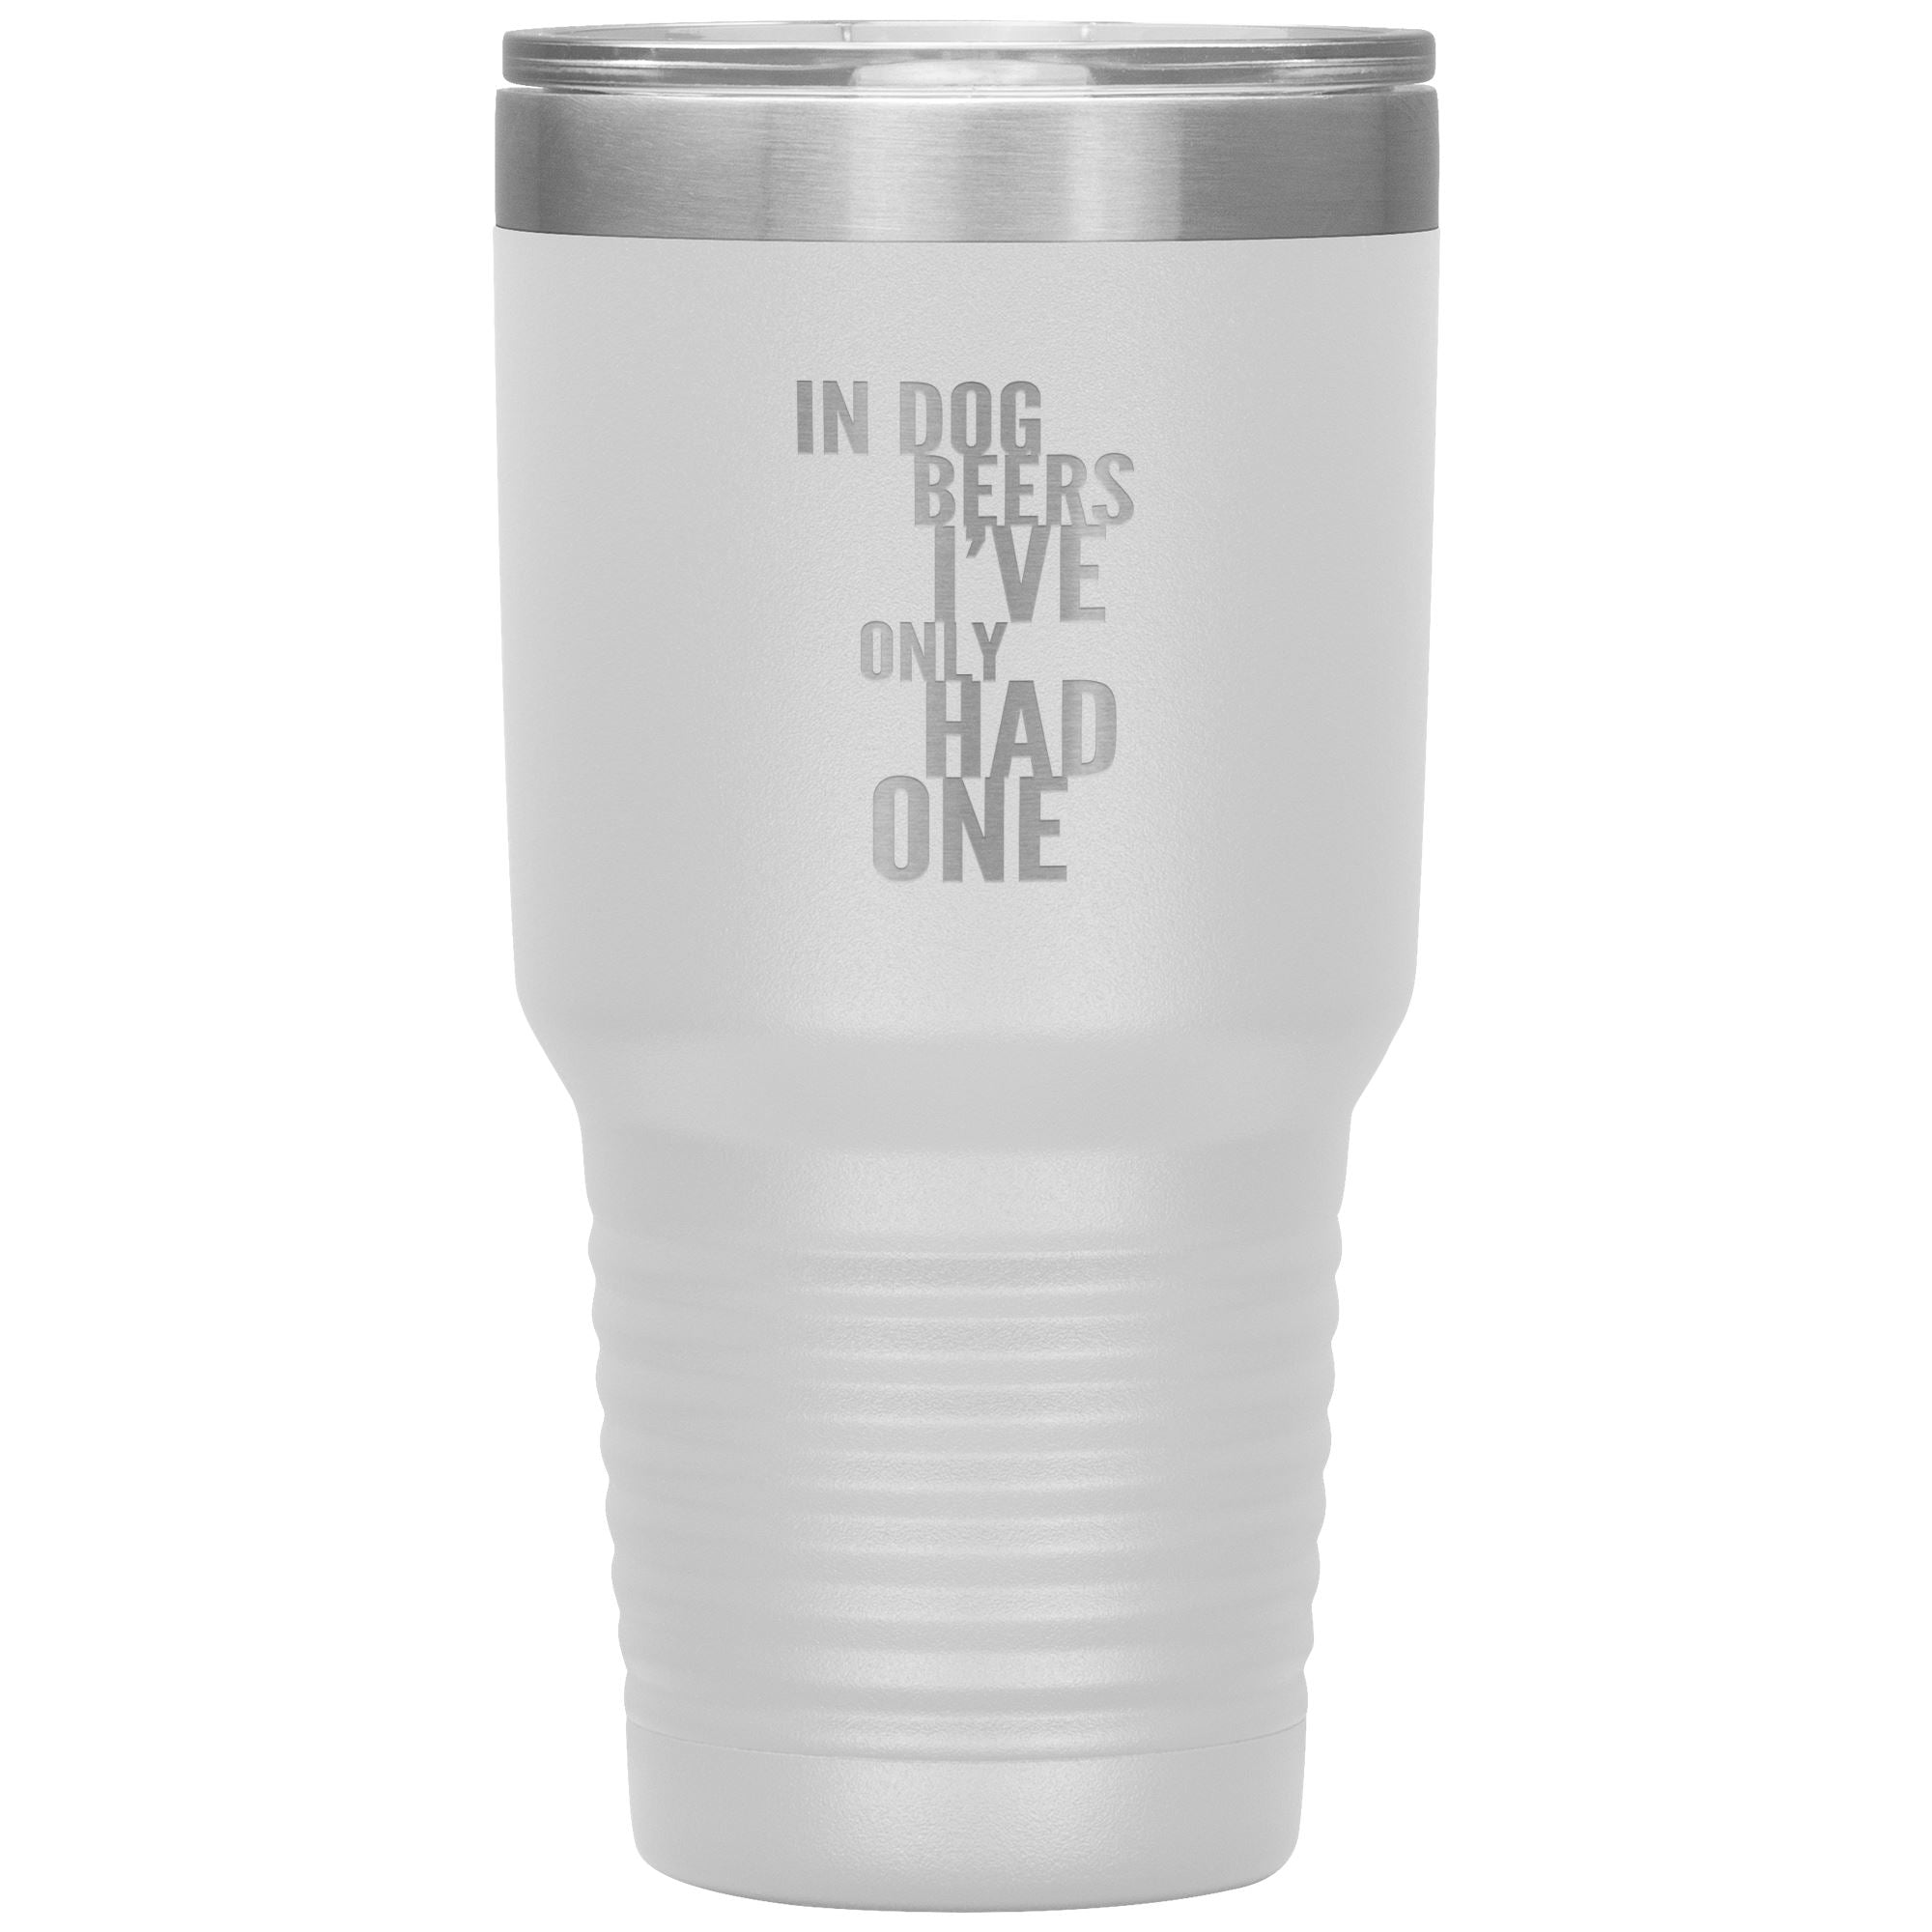 In Dog Beers I've Only Had One 30oz Tumbler Tumblers White 